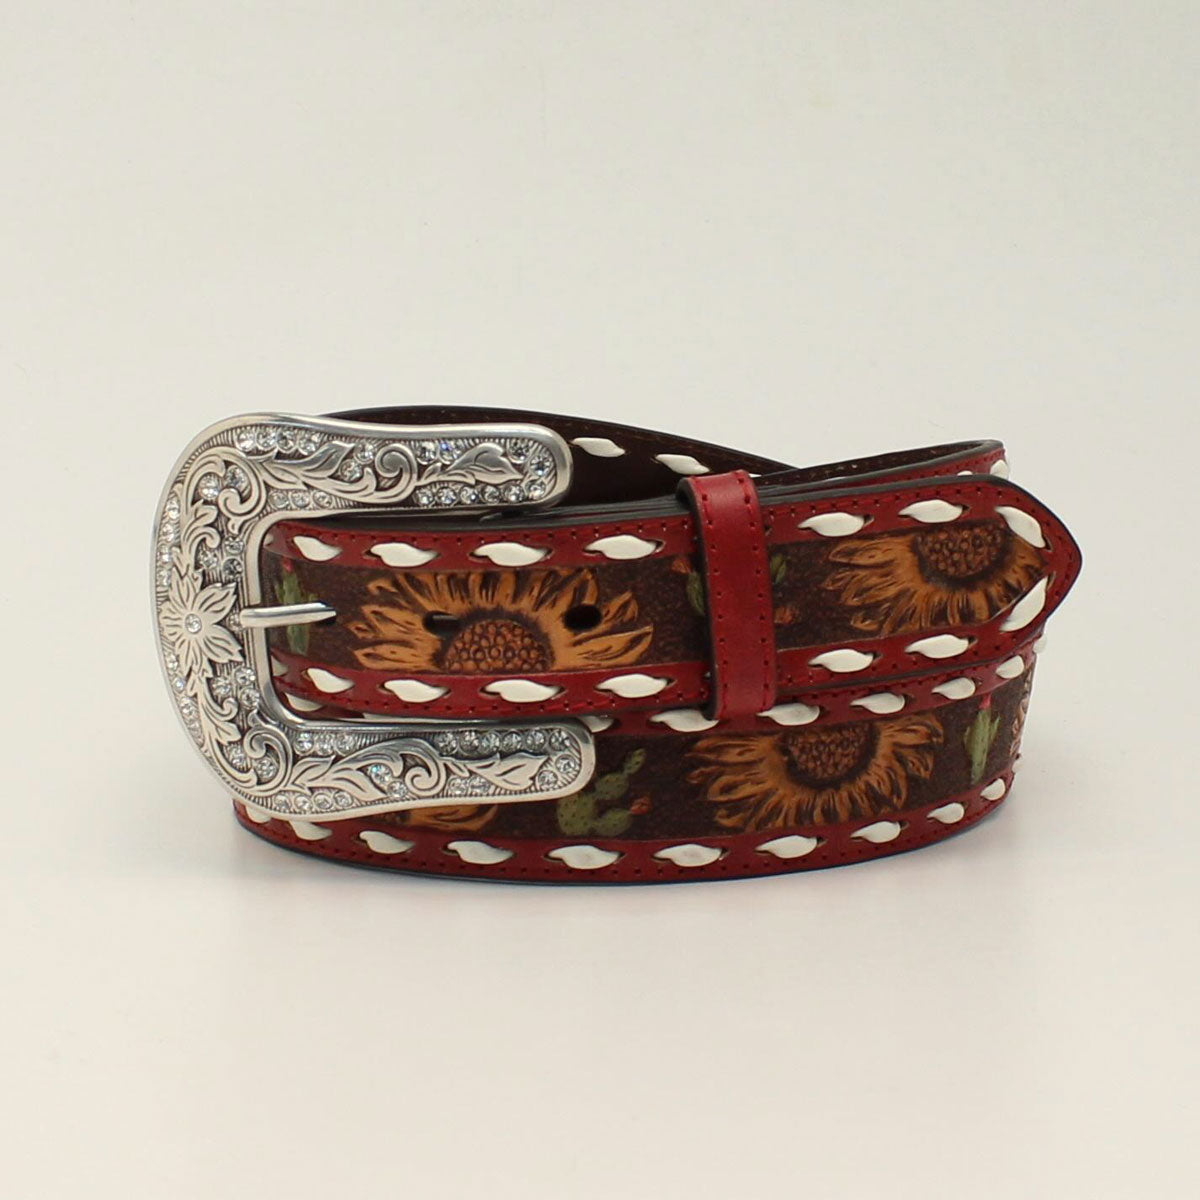 The Hippie Cowgirl Tooled Leather Belt